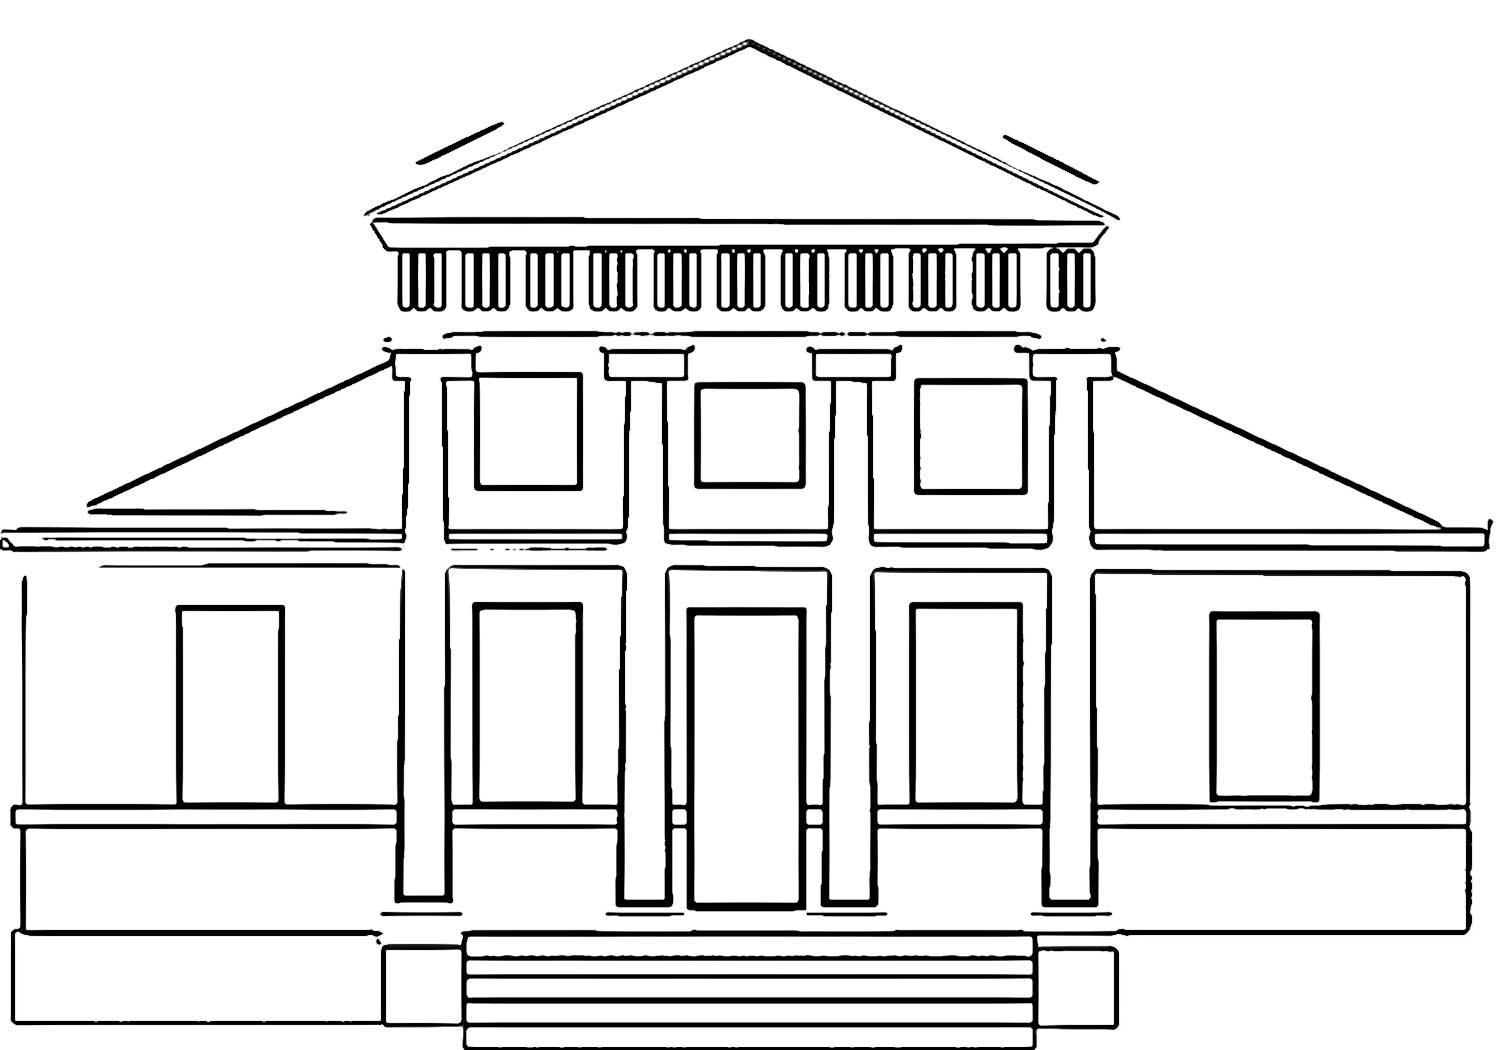 Building Coloring Page Free Printable Building H School Coloring Page 08i Wecoloring